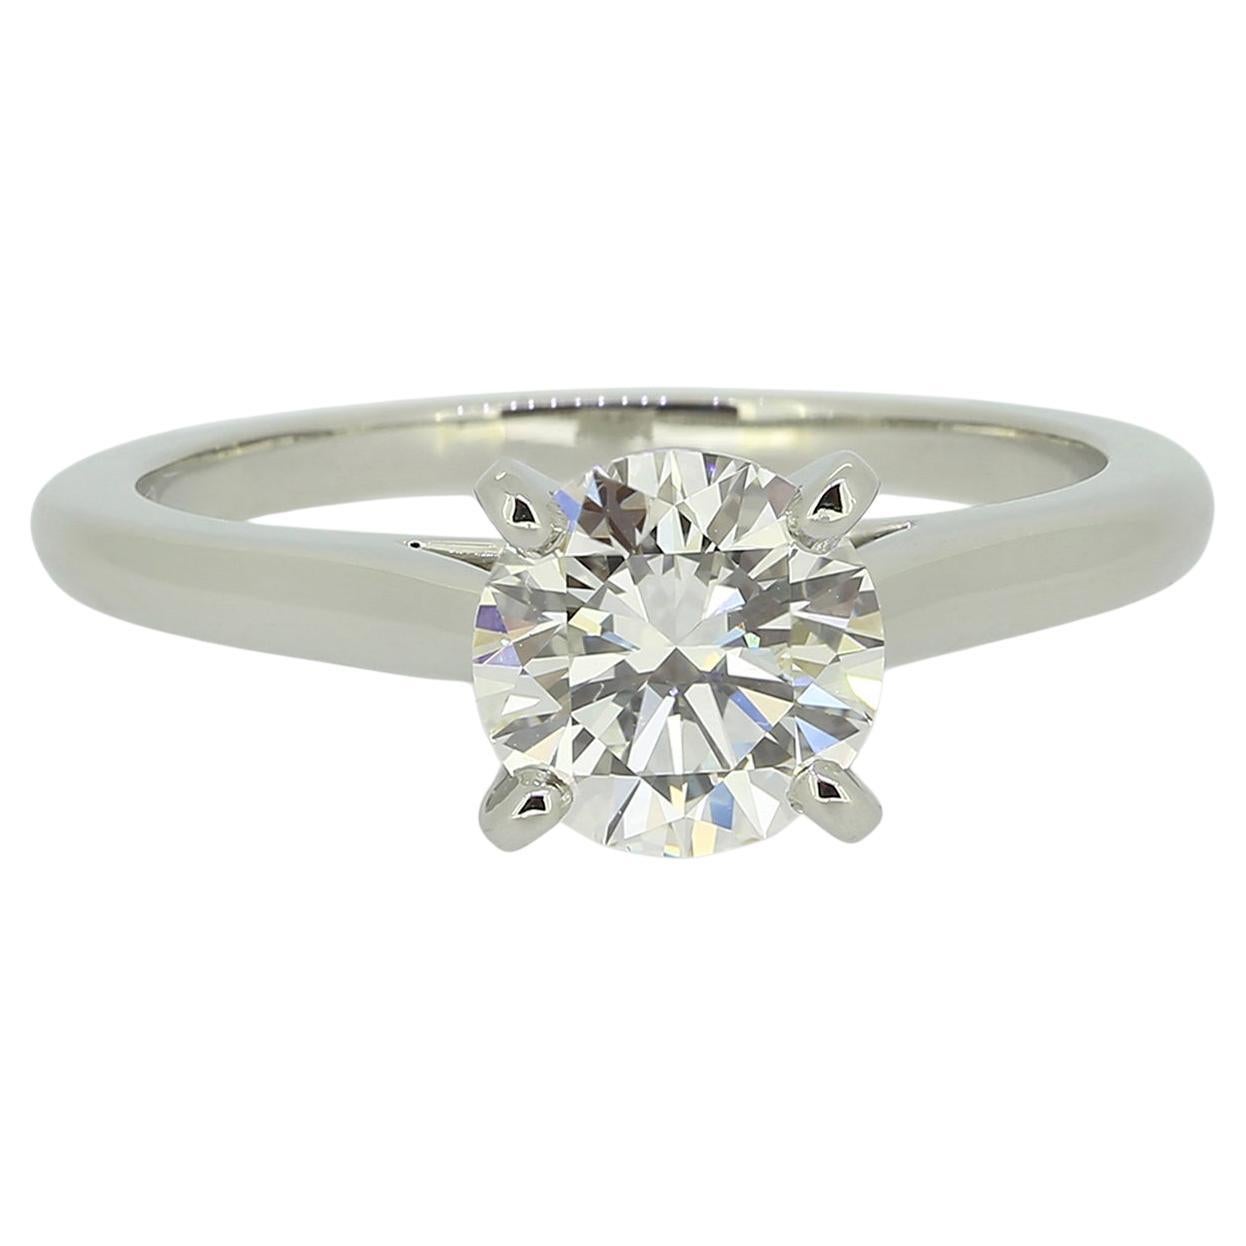 How much is a Cartier solitaire engagement ring?